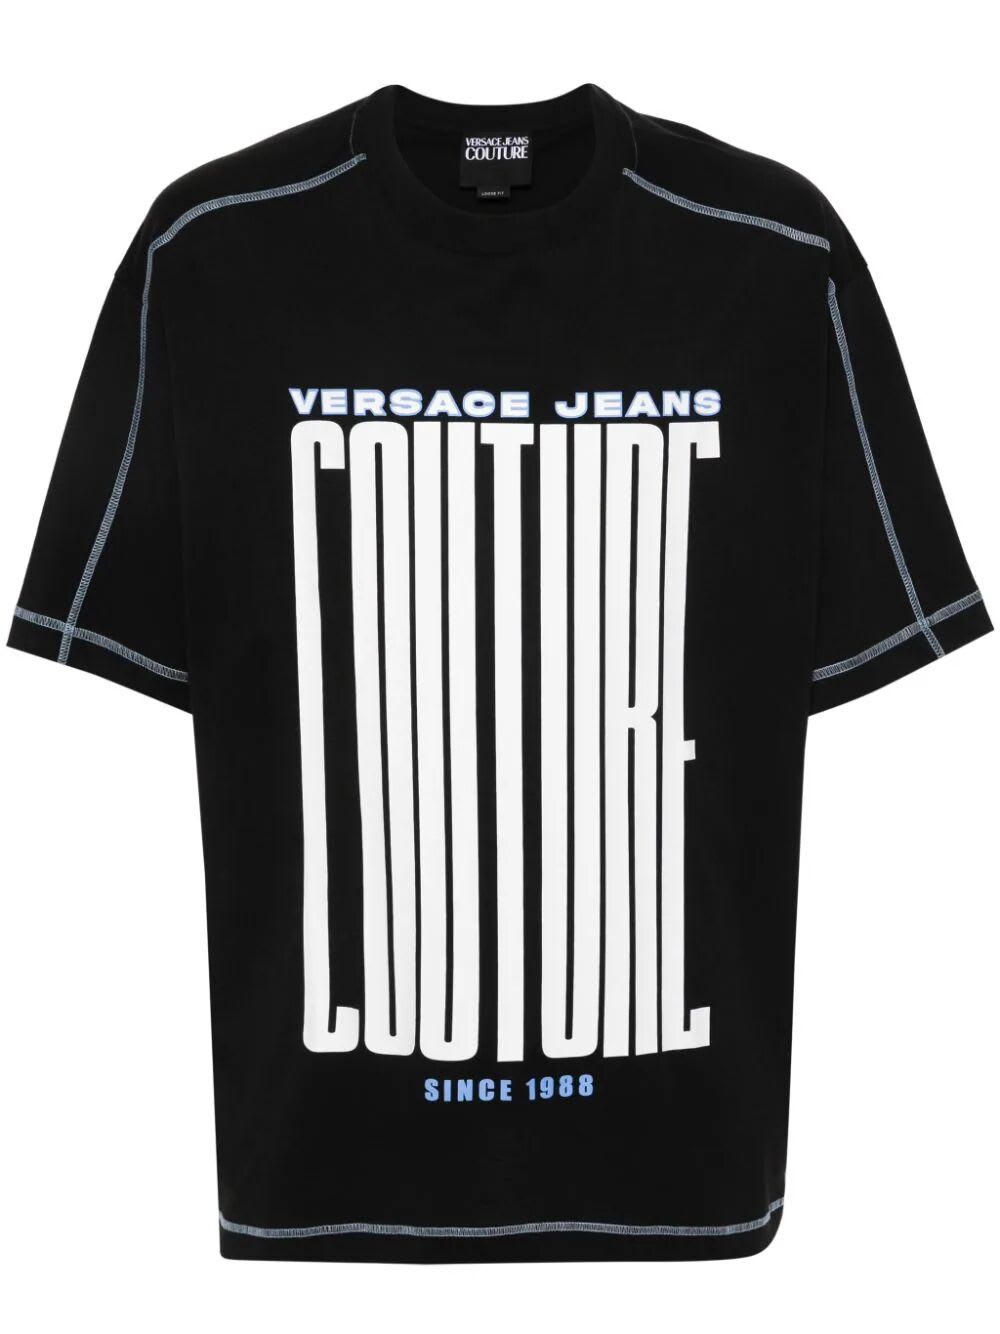 VERSACE JEANS COUTURE LOGO OVER T-SHIRT